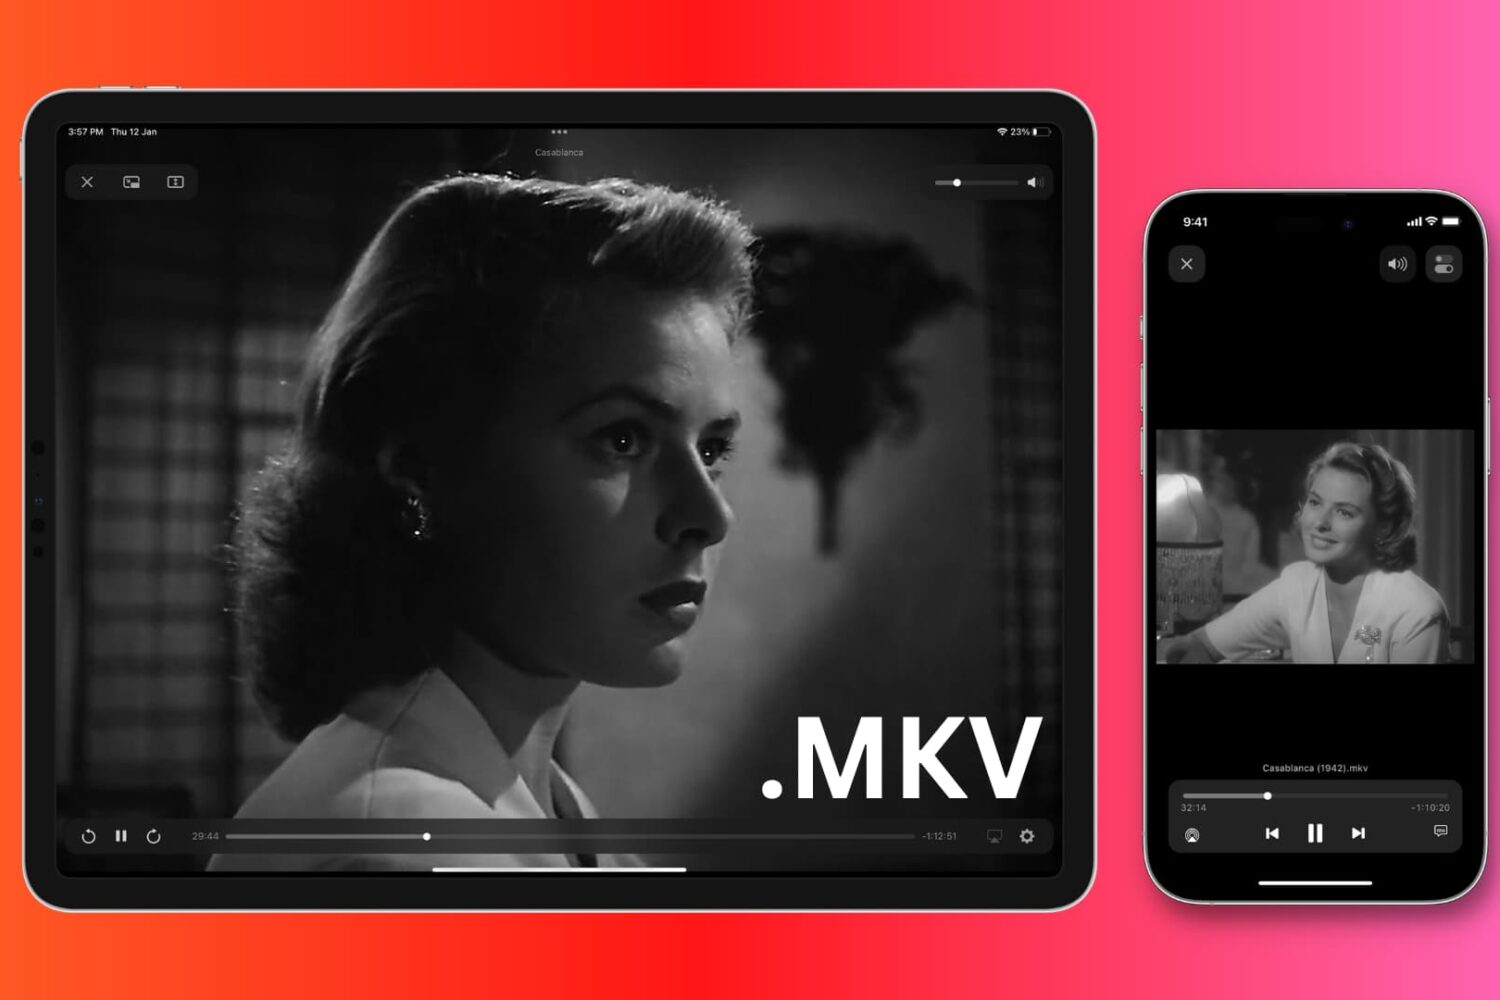 Playing MKV video file on iPhone and iPad